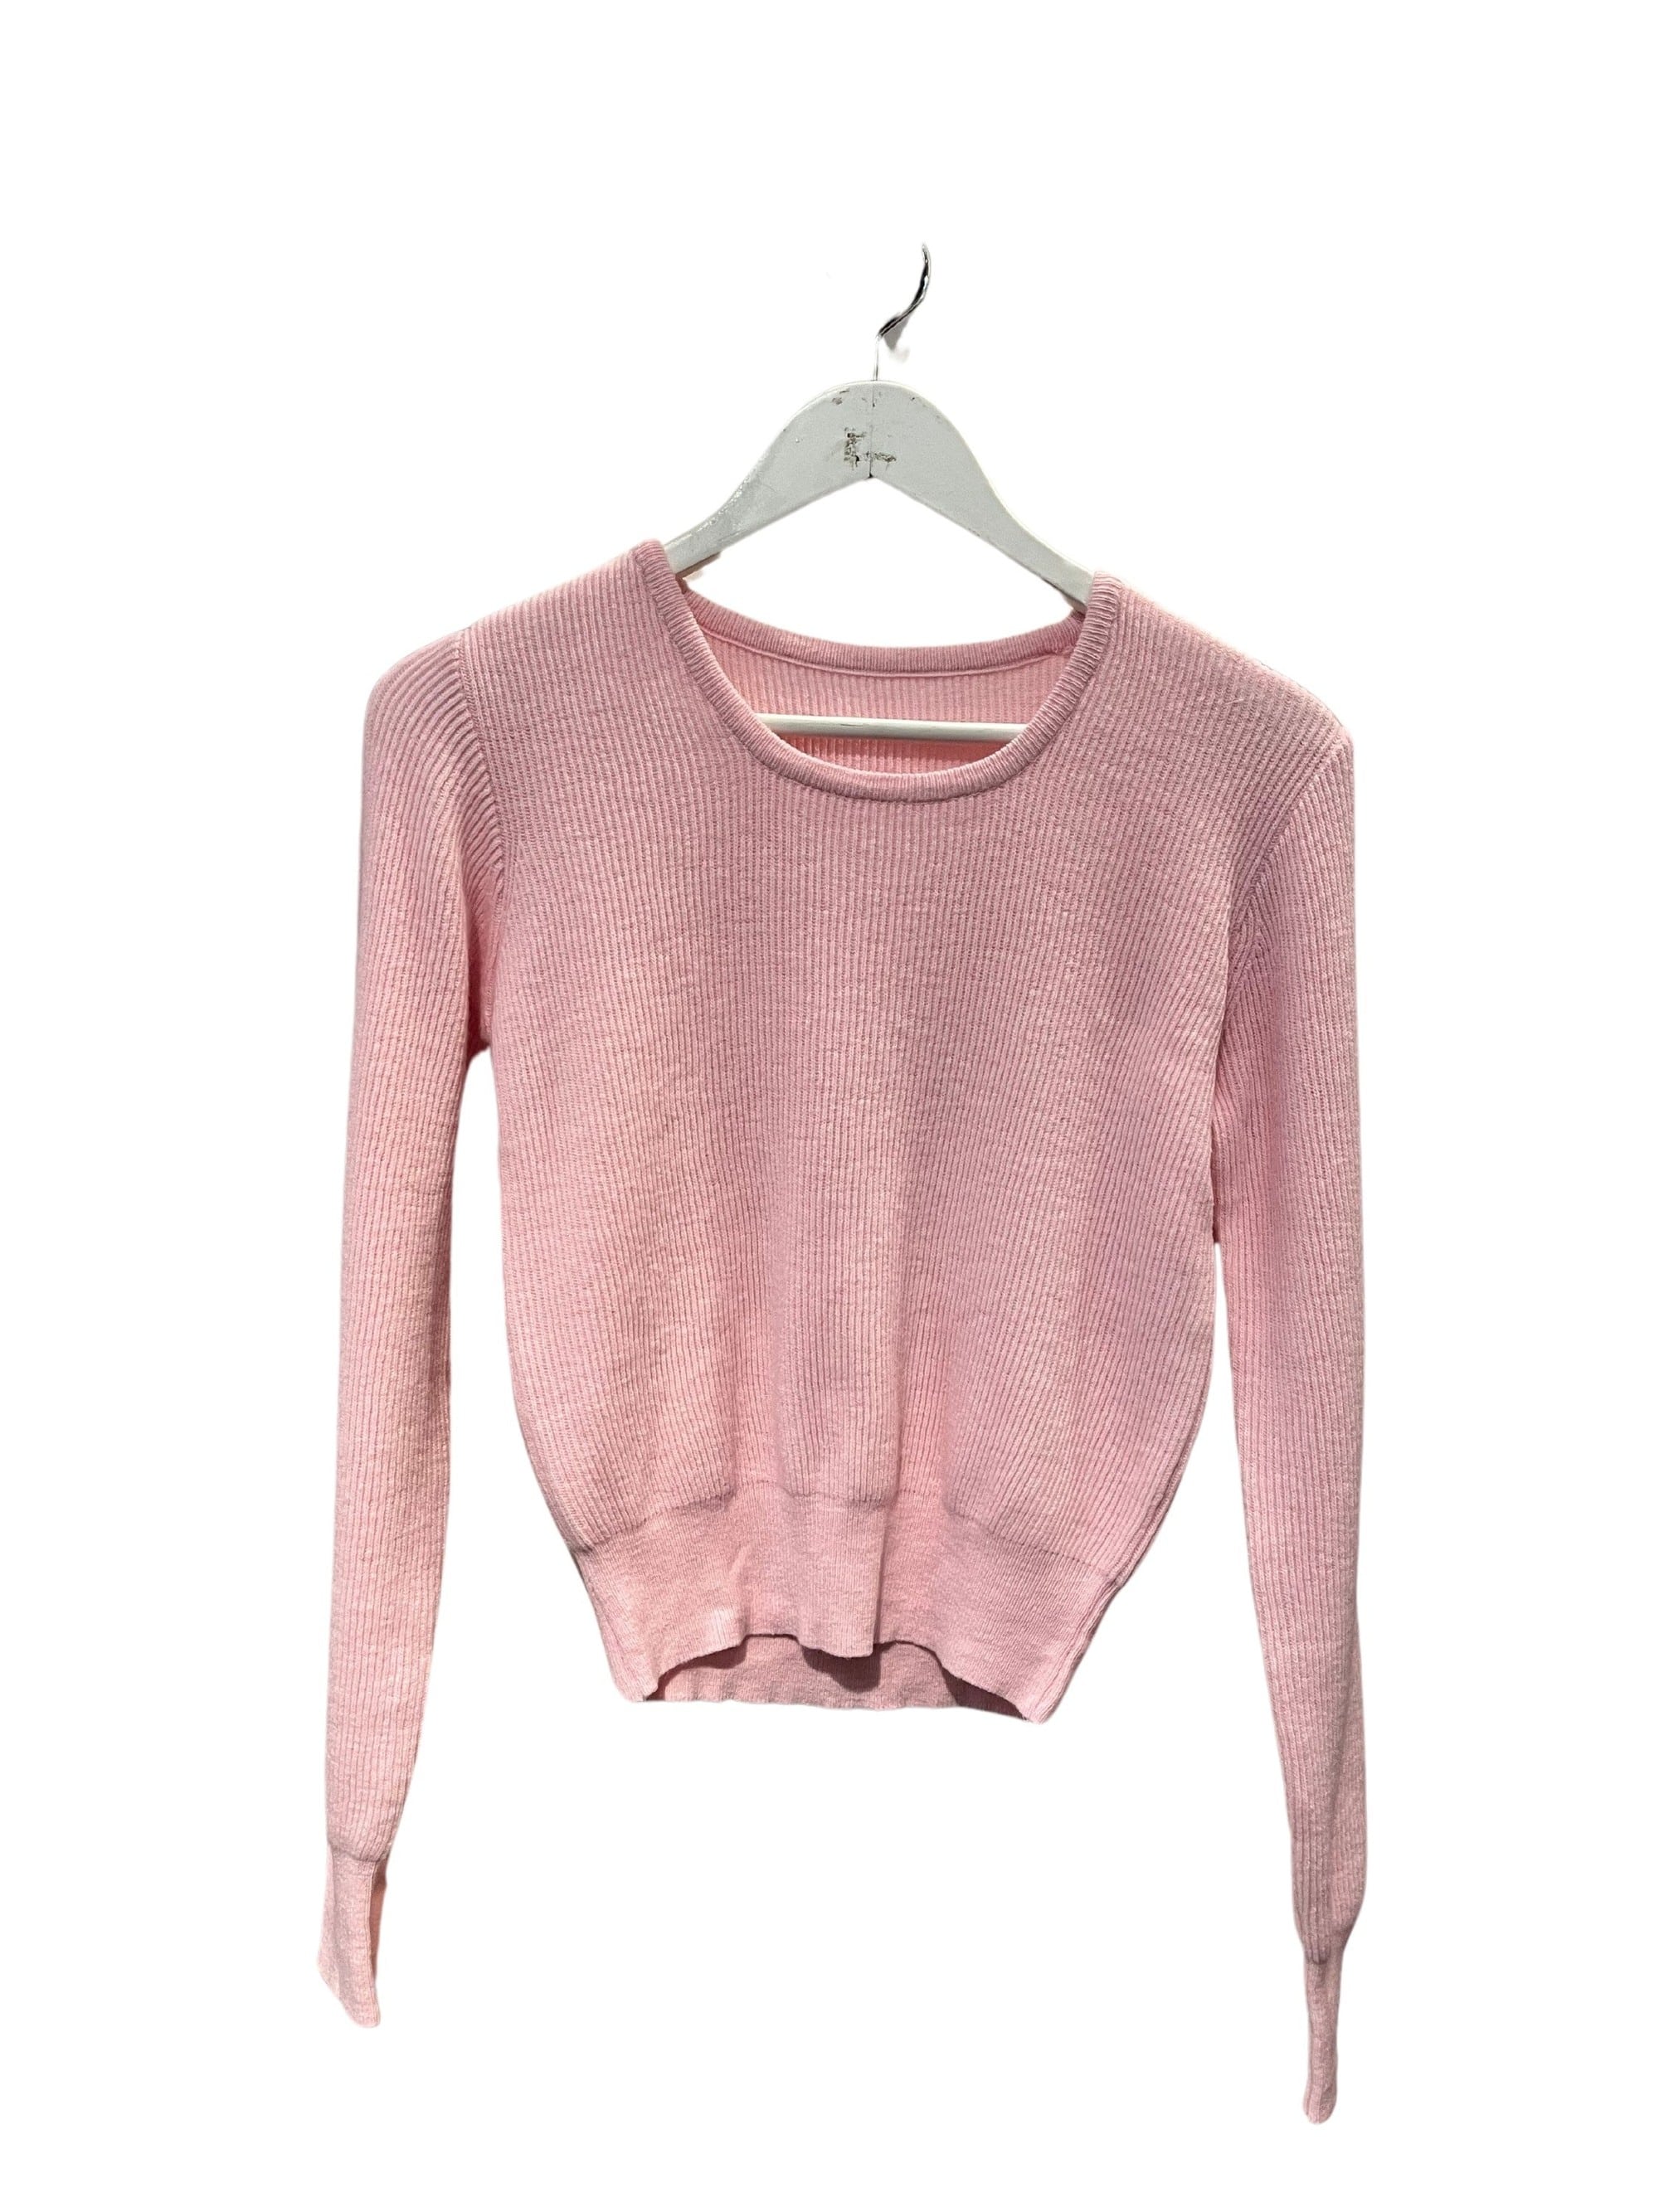 Clever Alice Pappy Knit in Cream, Pink, or Grey - clever alice